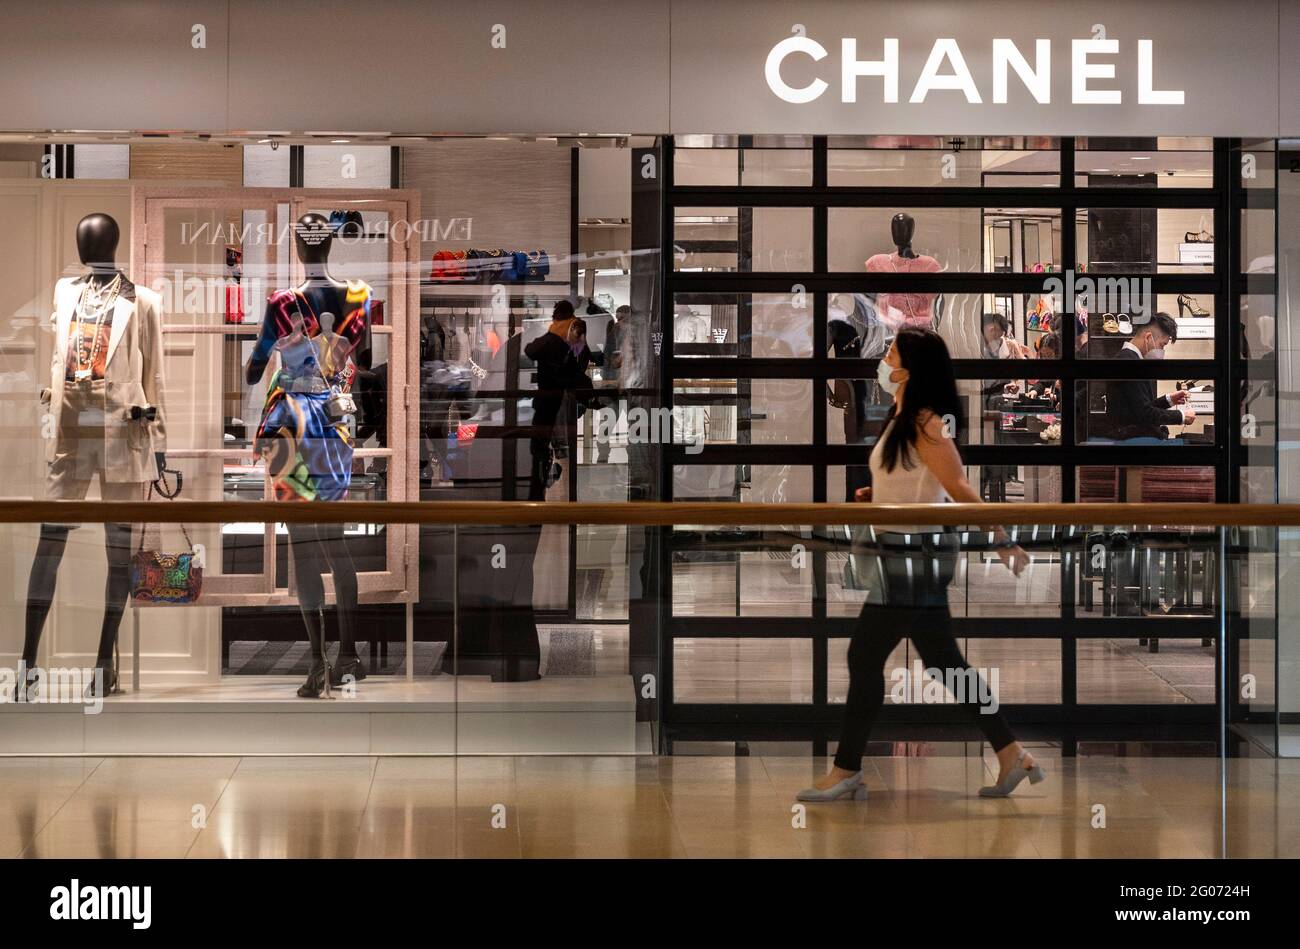 French multinational Chanel clothing and beauty products brand